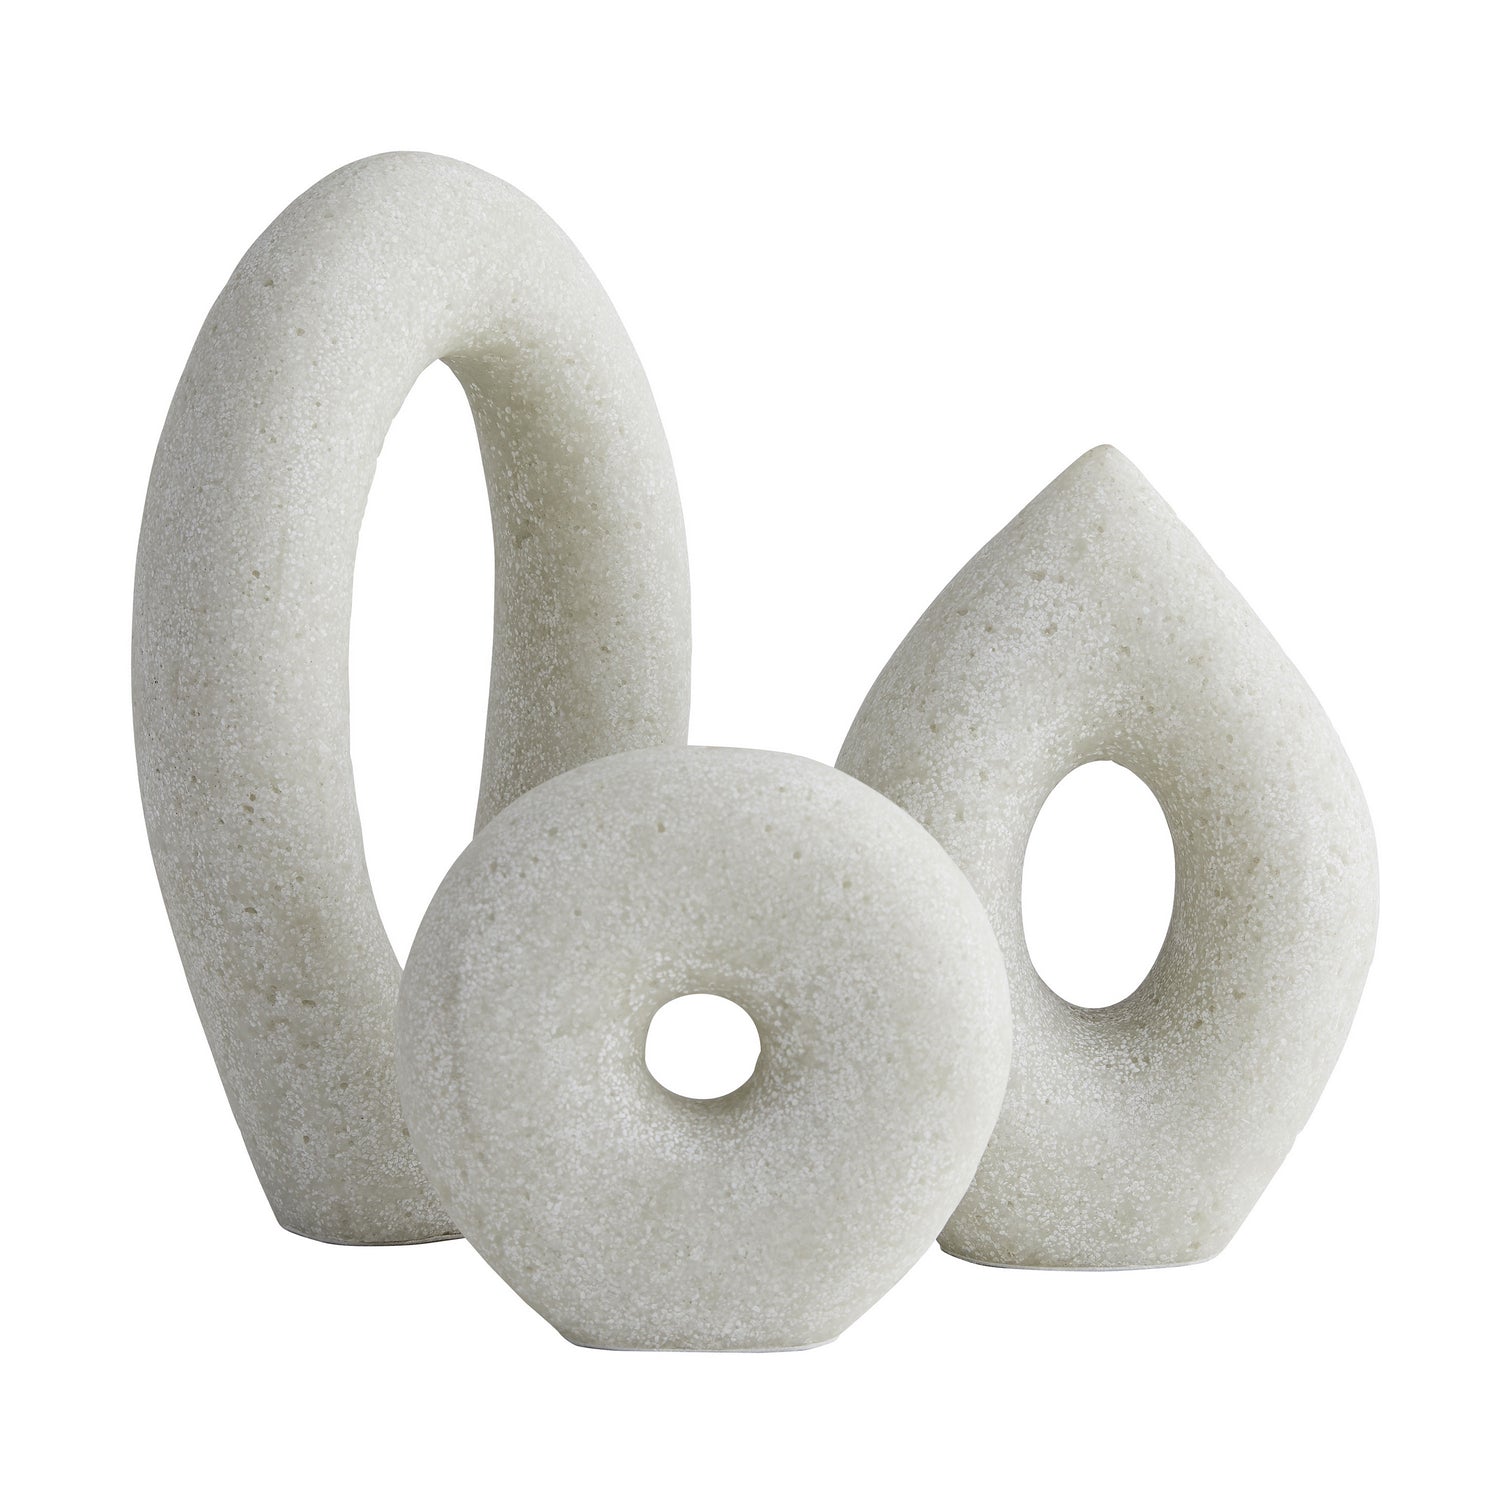 Sculptures Set of 3 from the Coco collection in White finish